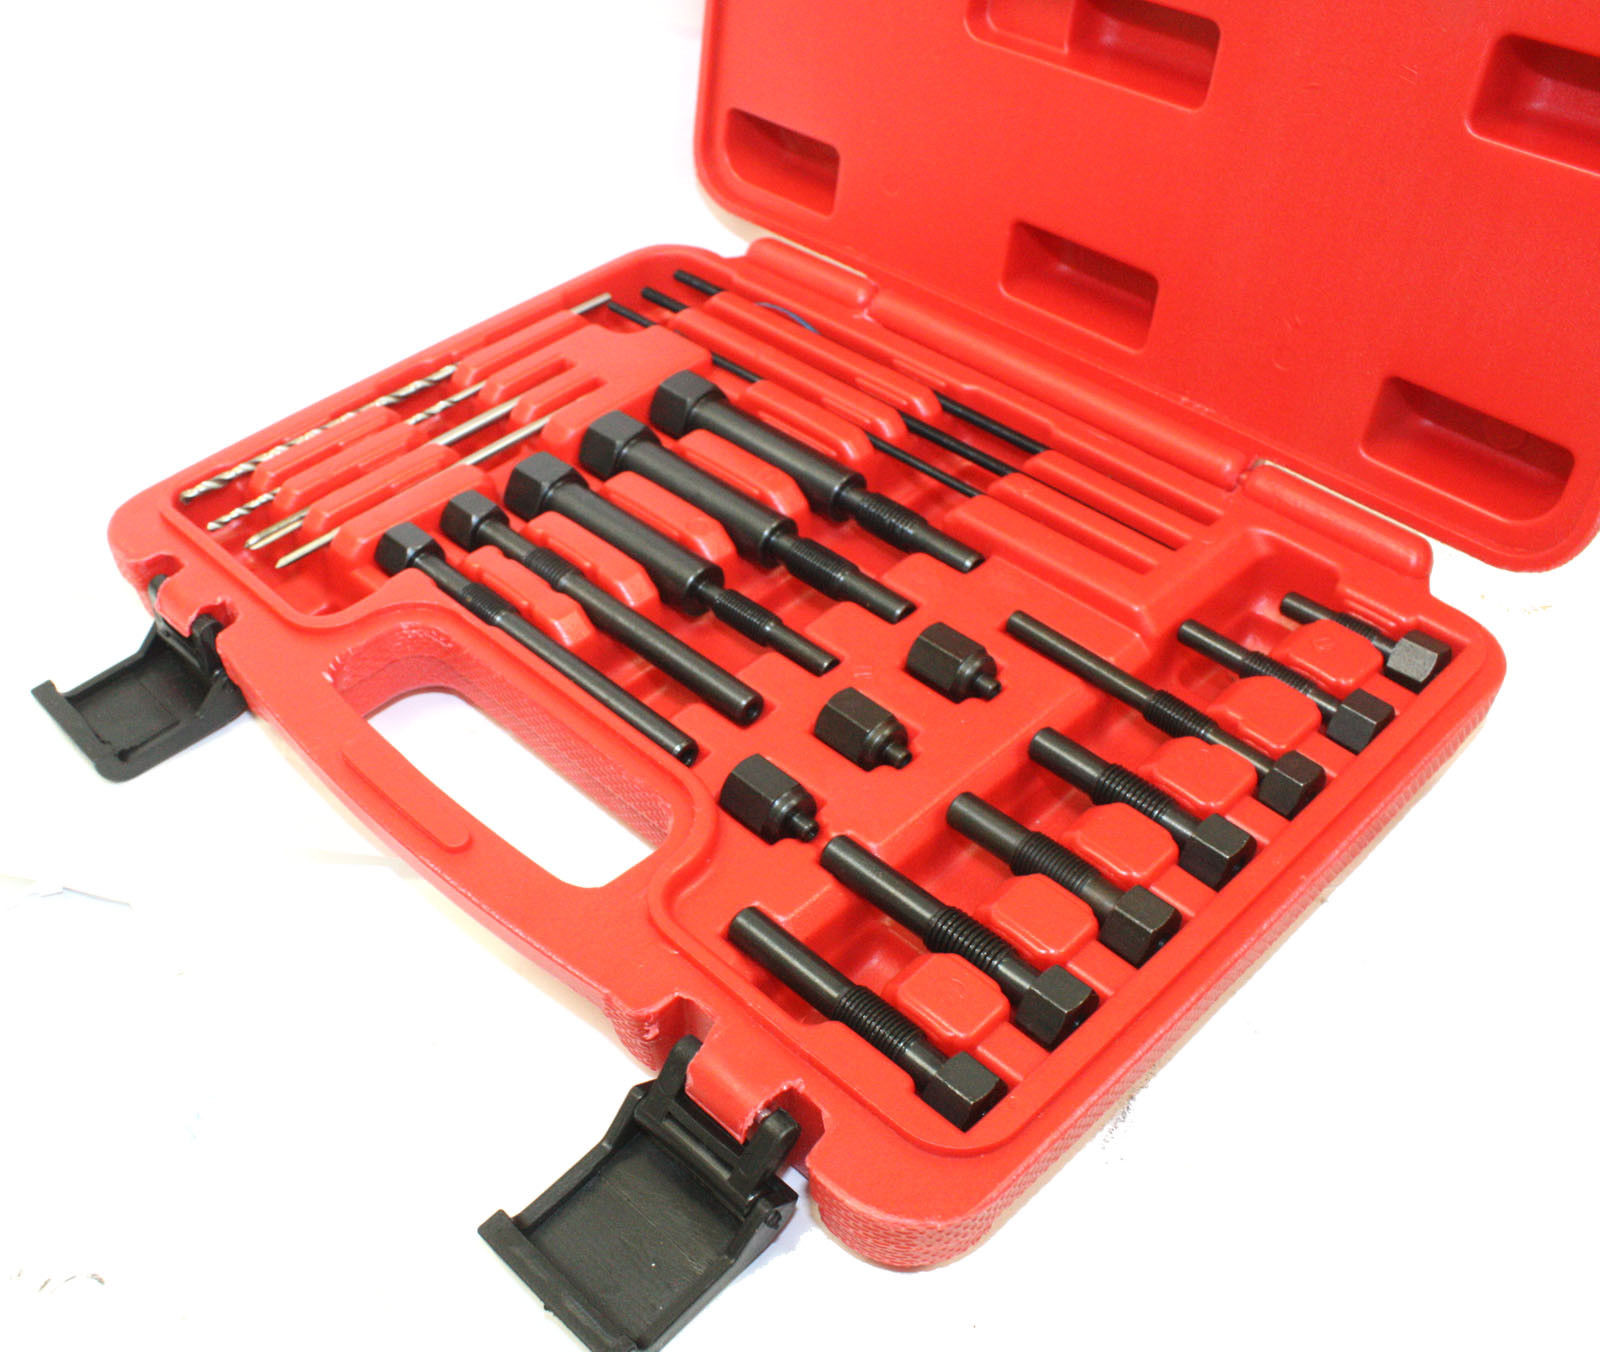 Glow Plug Removal,Glow Plug Removal Puller Extractor Heater Ele-ment Electrodes Drilling Tapping M8 M10